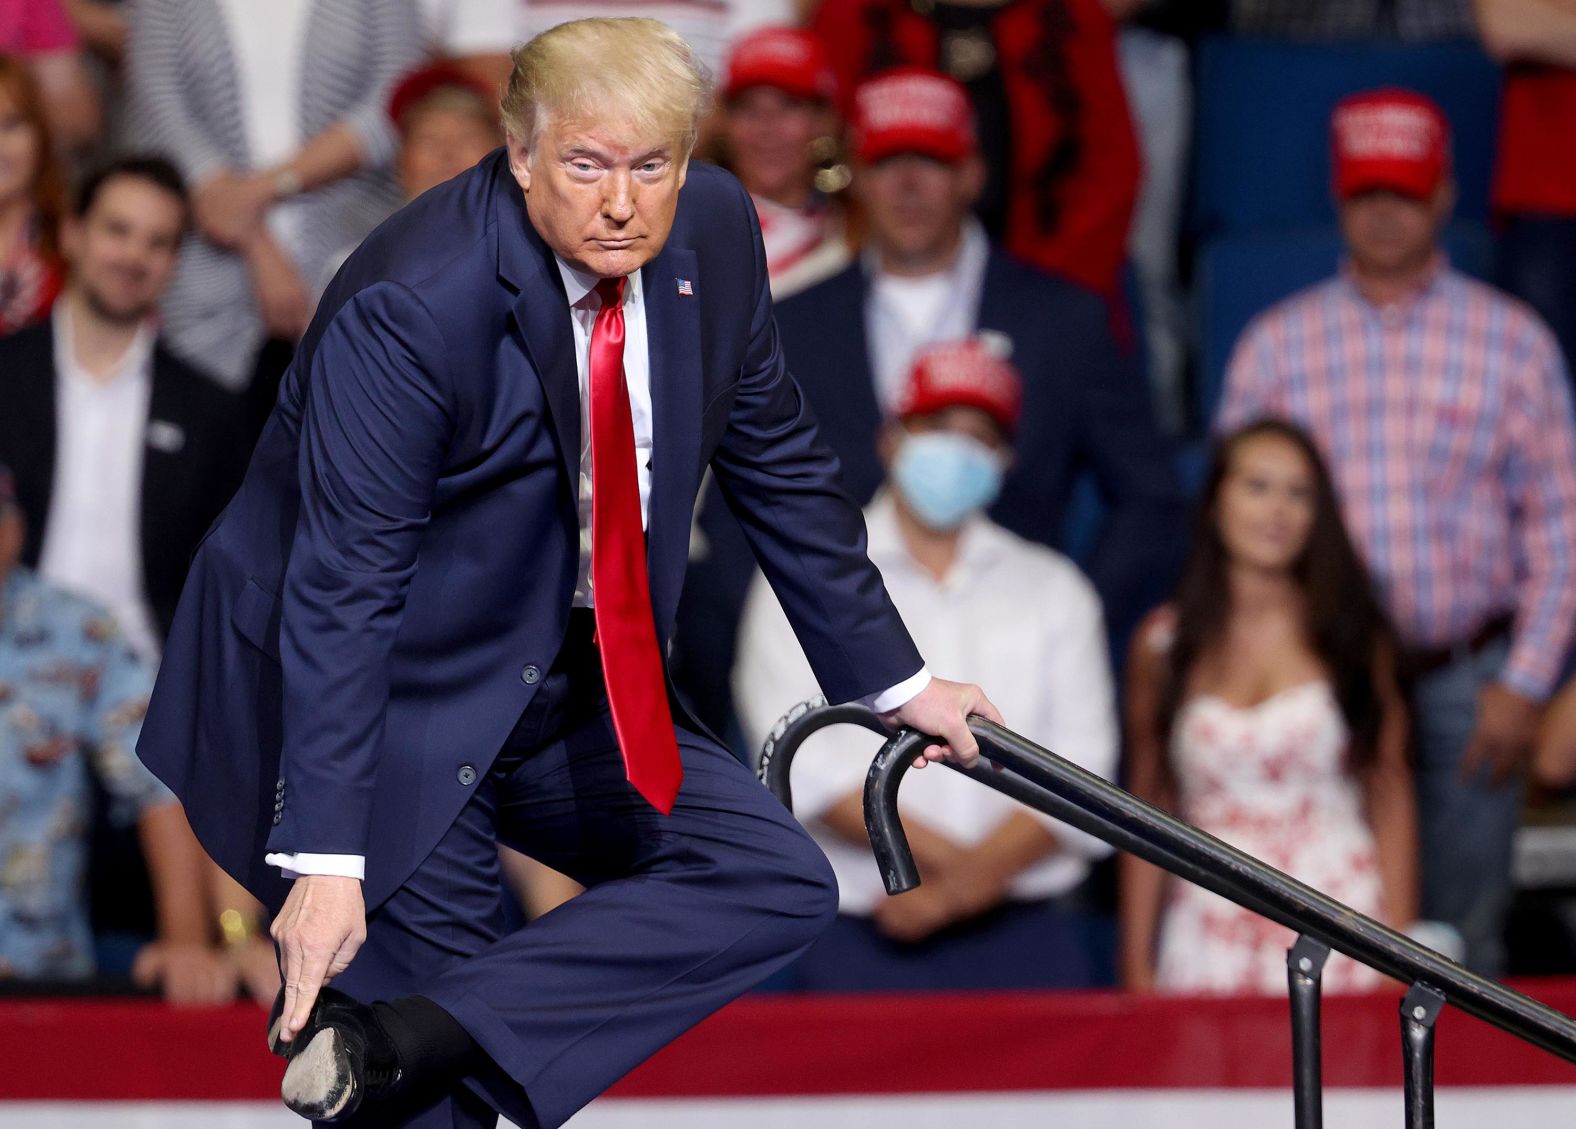 Trump points to his shoe as he<a href="index.php?page=&url=https%3A%2F%2Fwww.cnn.com%2Fpolitics%2Flive-news%2Ftrump-rally-tulsa-oklahoma%2Fh_b447102cdbae2bb87ff7783ae191c872" target="_blank"> explains his careful descent down a ramp</a> earlier this month after a speech at West Point. Trump said the reason he was so careful walking down the ramp was that he was wearing "leather bottom shoes" and worried that he might slip due to the lack of traction. 